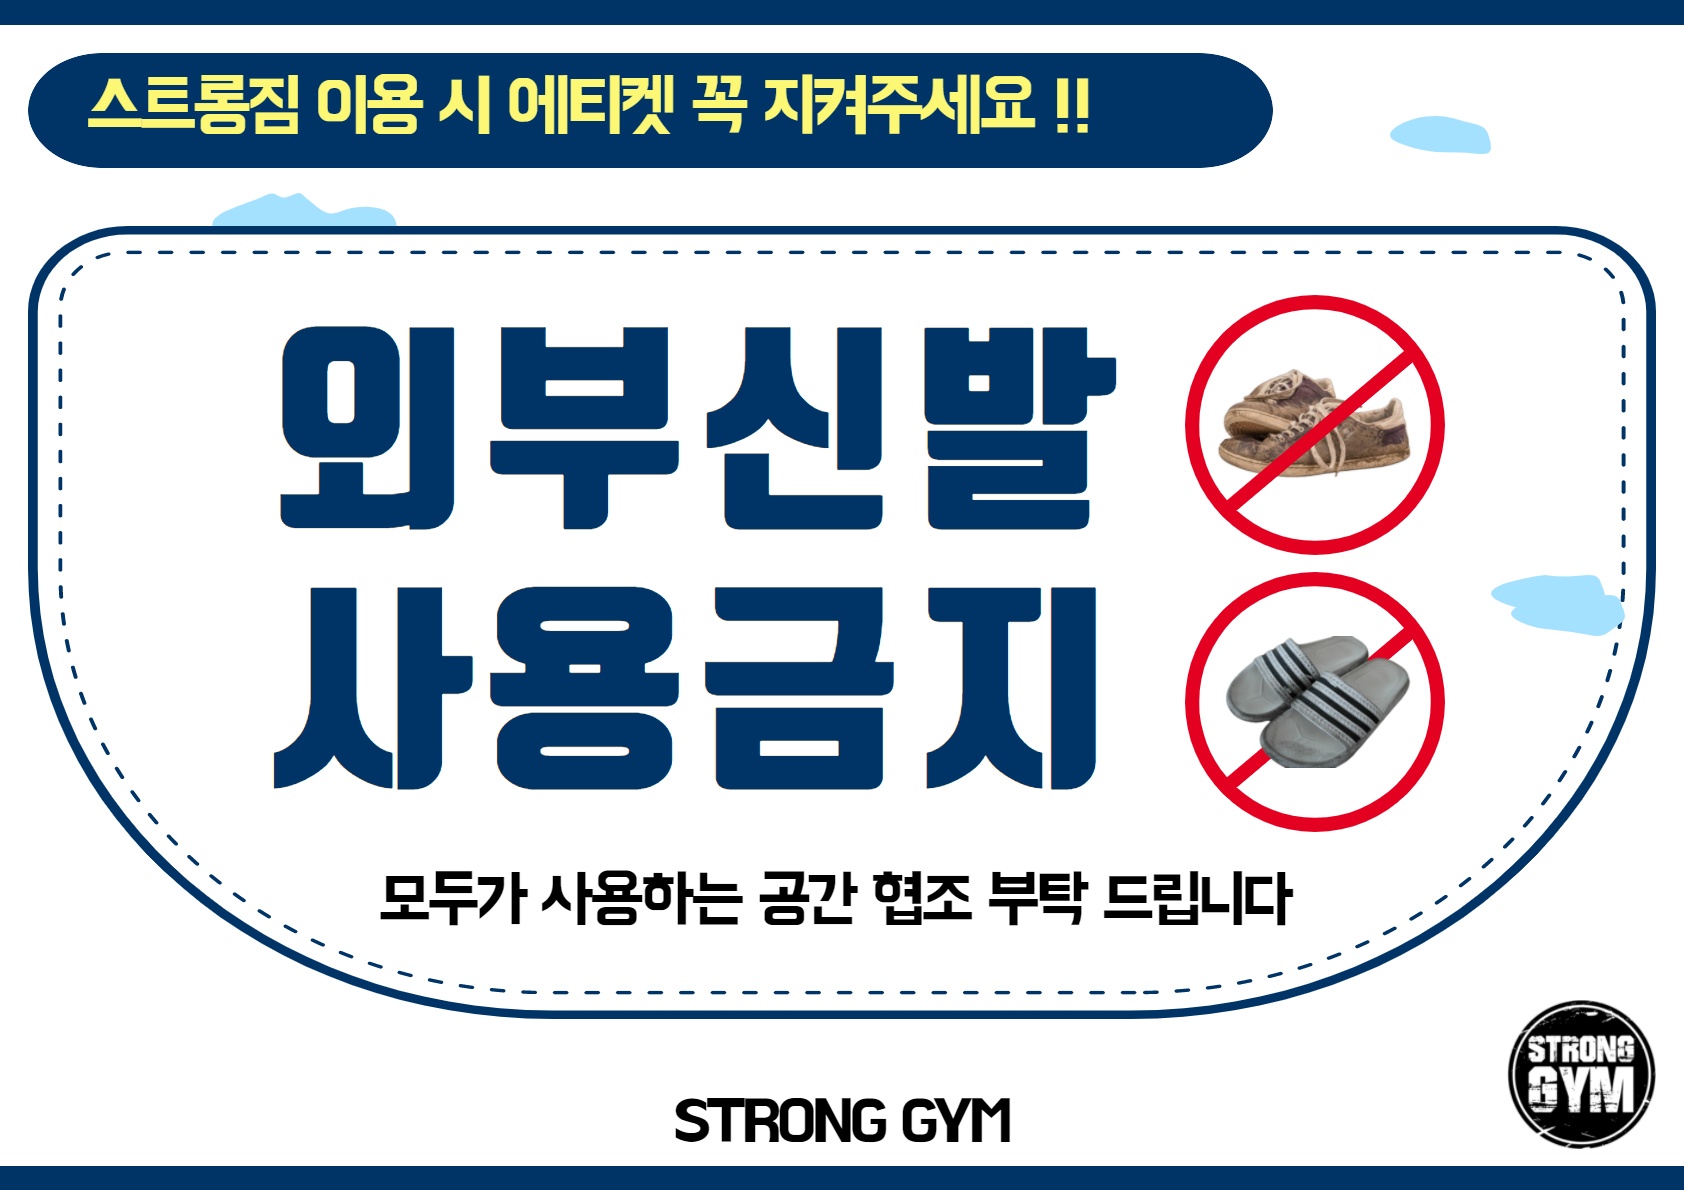 http://www.stronggym.co.kr/user/s/stronggym/editor/2102/4a998d7c4e606e8dc7ea09c67b43ab05_1613973347_0841.jpg 이미지크게보기